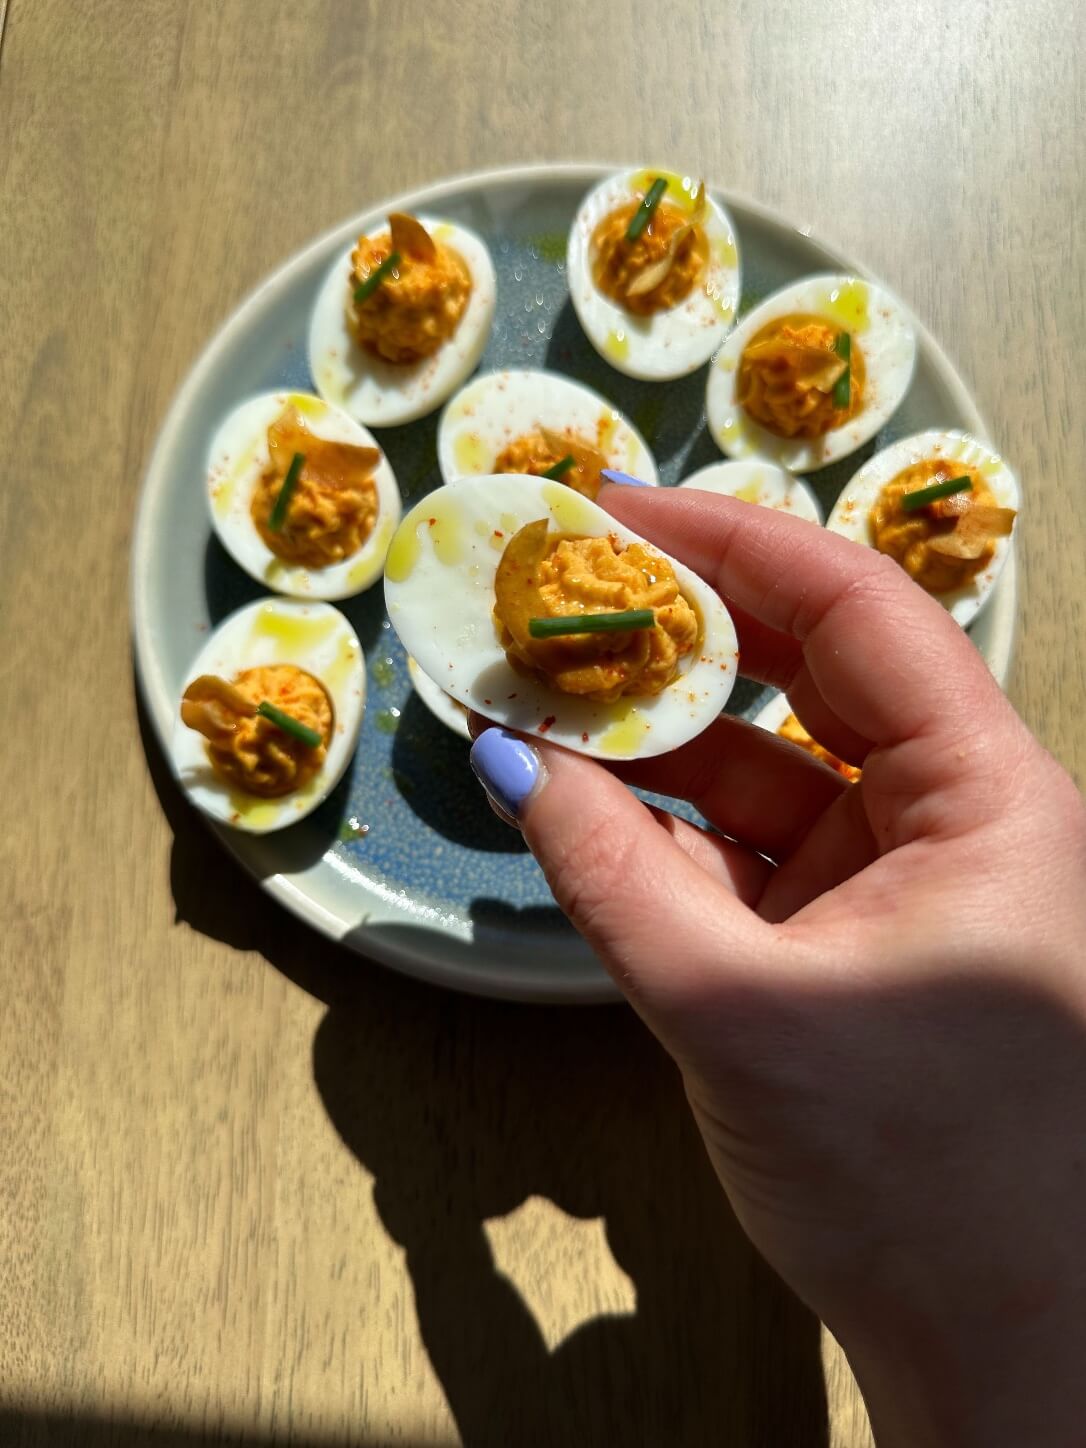 Calabrian Chili and Fried Garlic Deviled Eggs